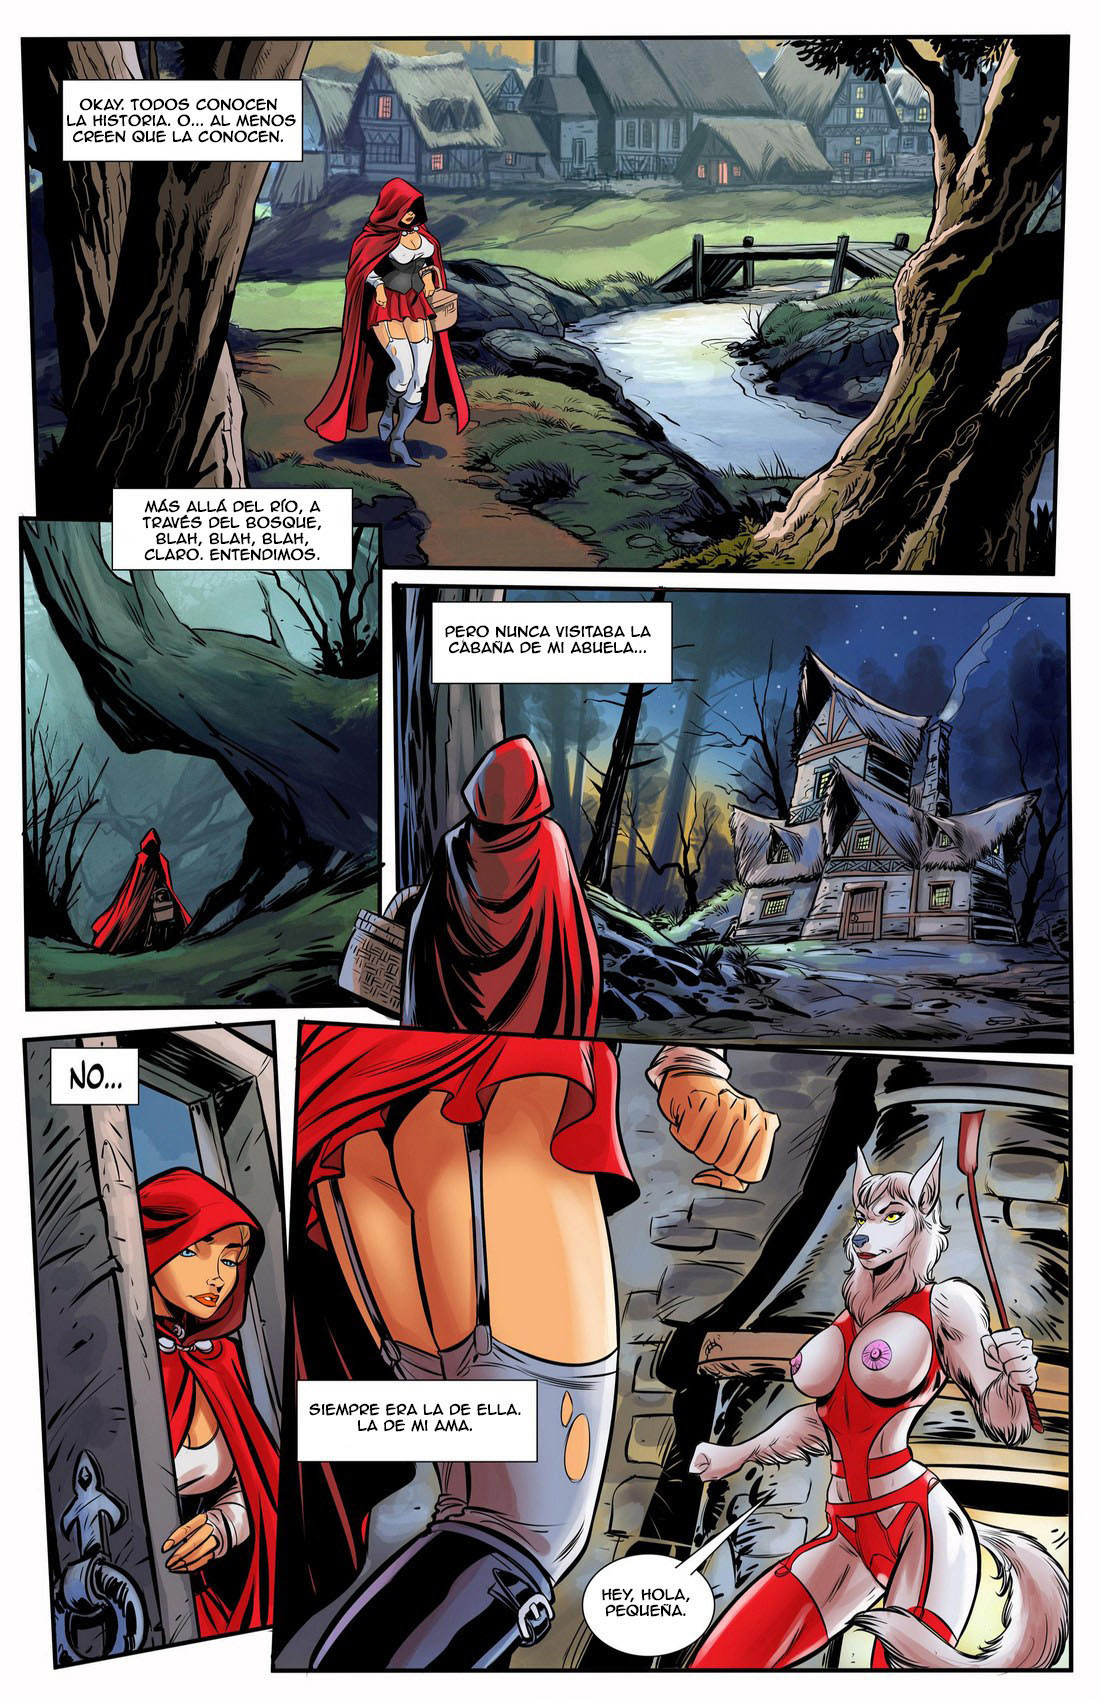 LITTLE RED Riding Hood